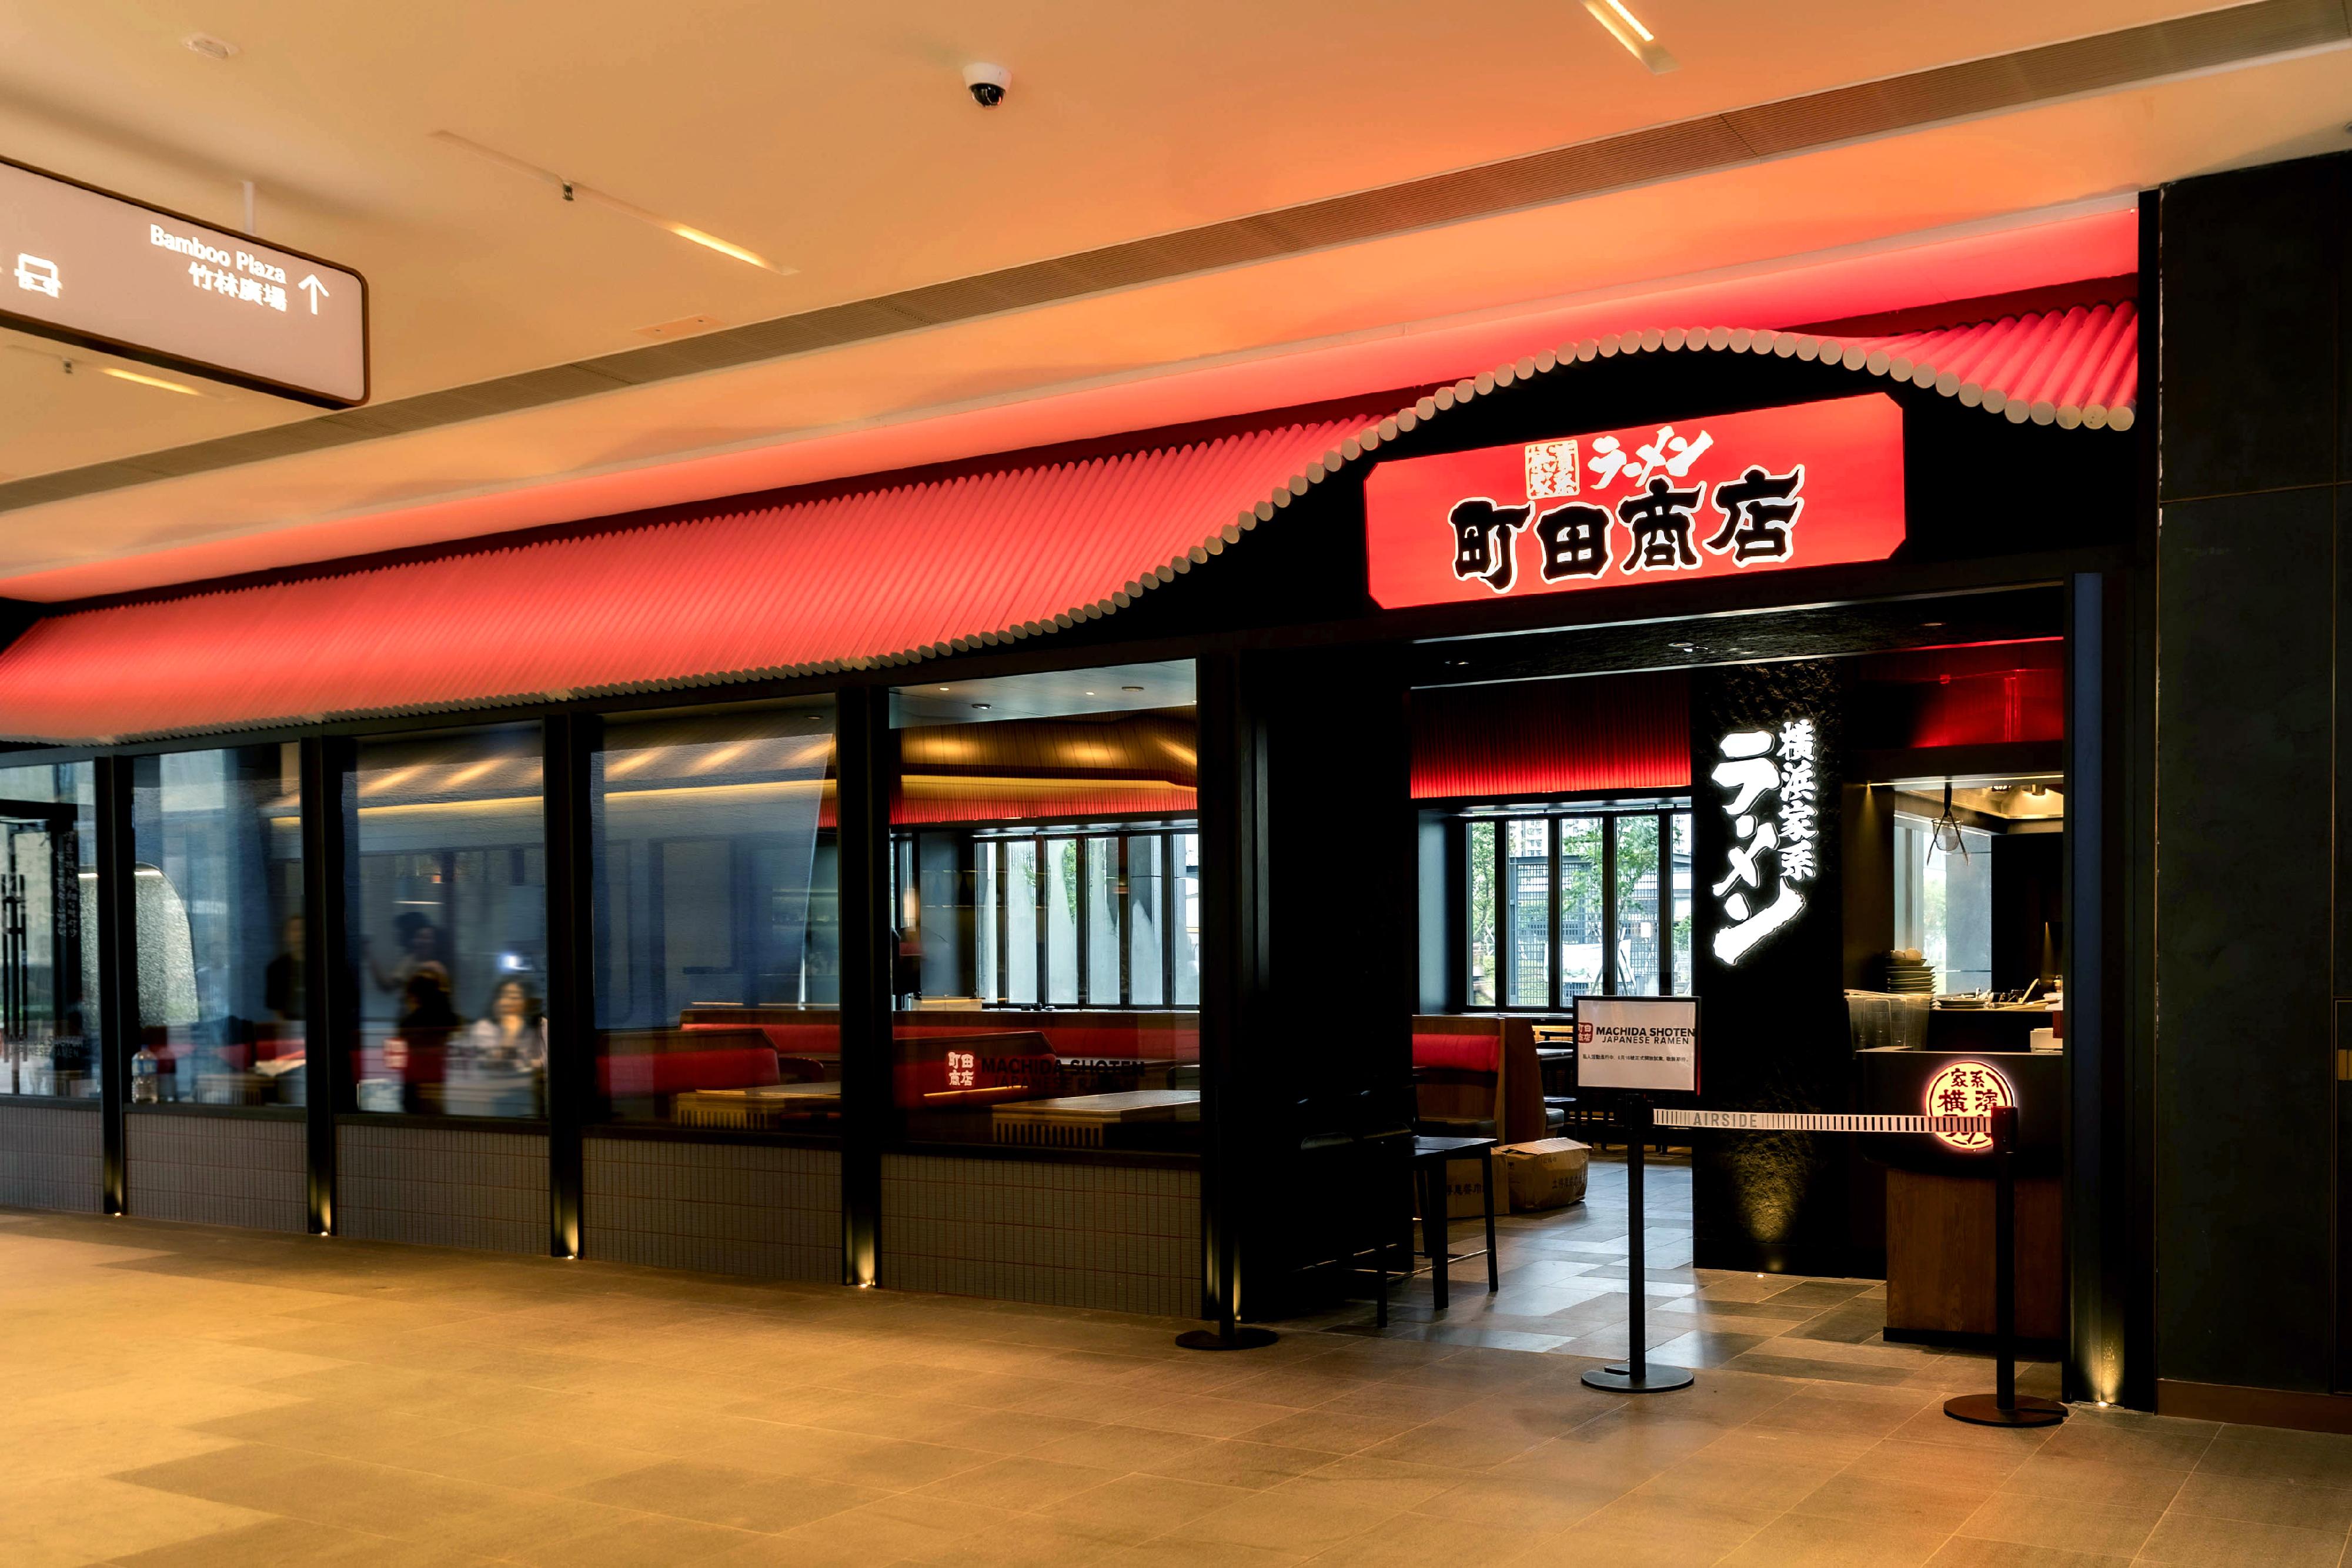 Invest Hong Kong (InvestHK) announced that Gift Holdings Inc from Japan opened its first “Machida Shoten” ramen store in Hong Kong today (June 27), bringing authentic Yokohama style ramen to the city. Photo shows its first store in Airside, Kai Tak.
